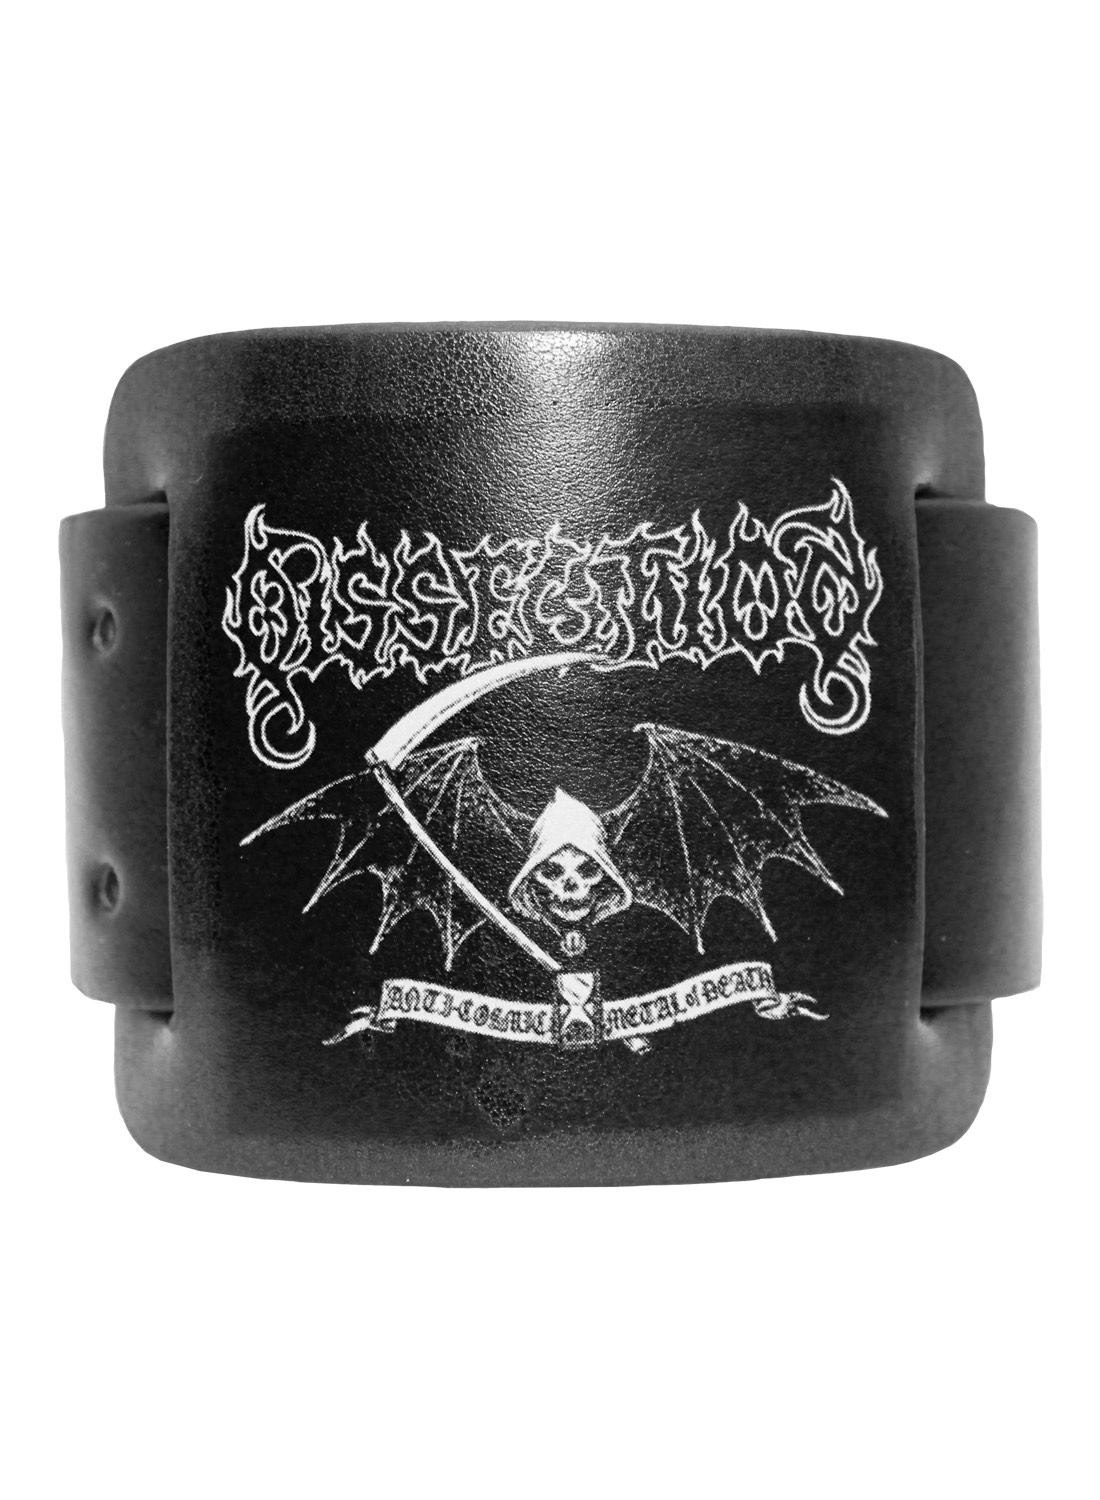 Dissection Leather Wristband